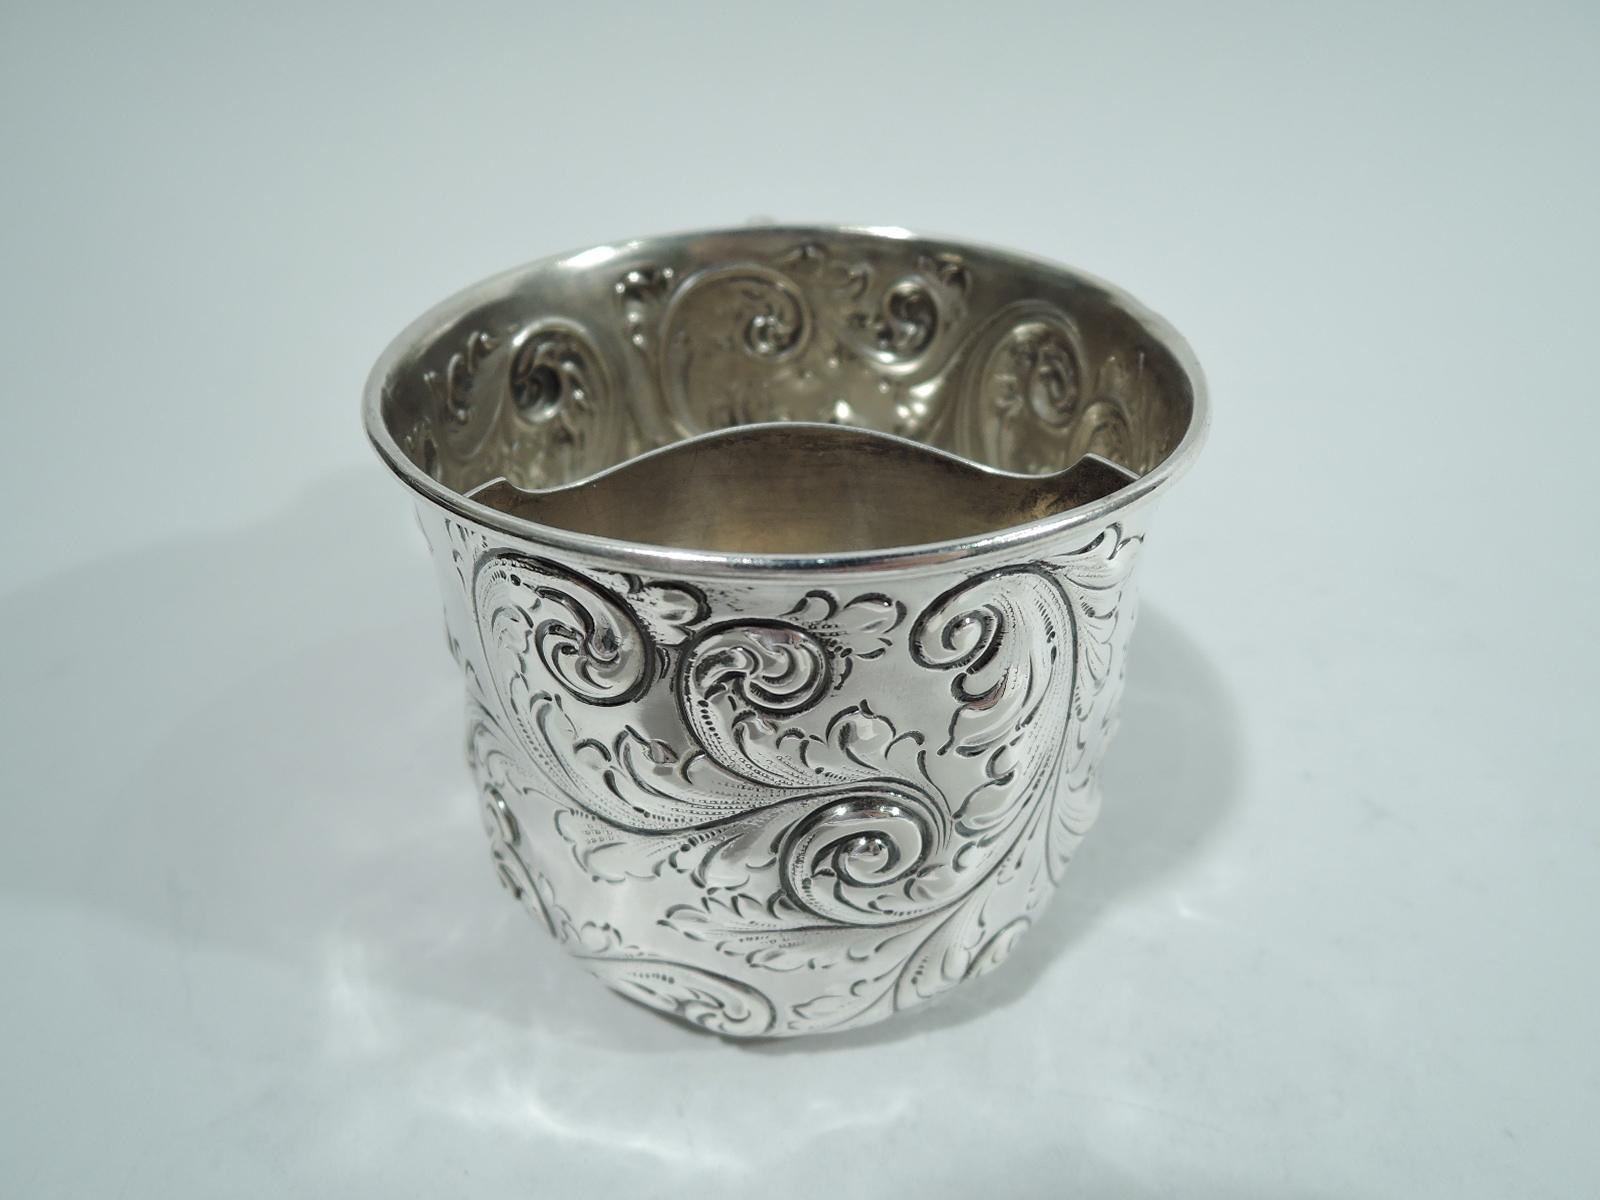 Victorian sterling silver shaving mug. Made by Gorham in Providence in 1892. Straight sides and curved bottom with foot ring. Loose and dynamic leafing scrolls chased and engraved on sides. Leaf-capped scroll handle with bead-and-real applied to